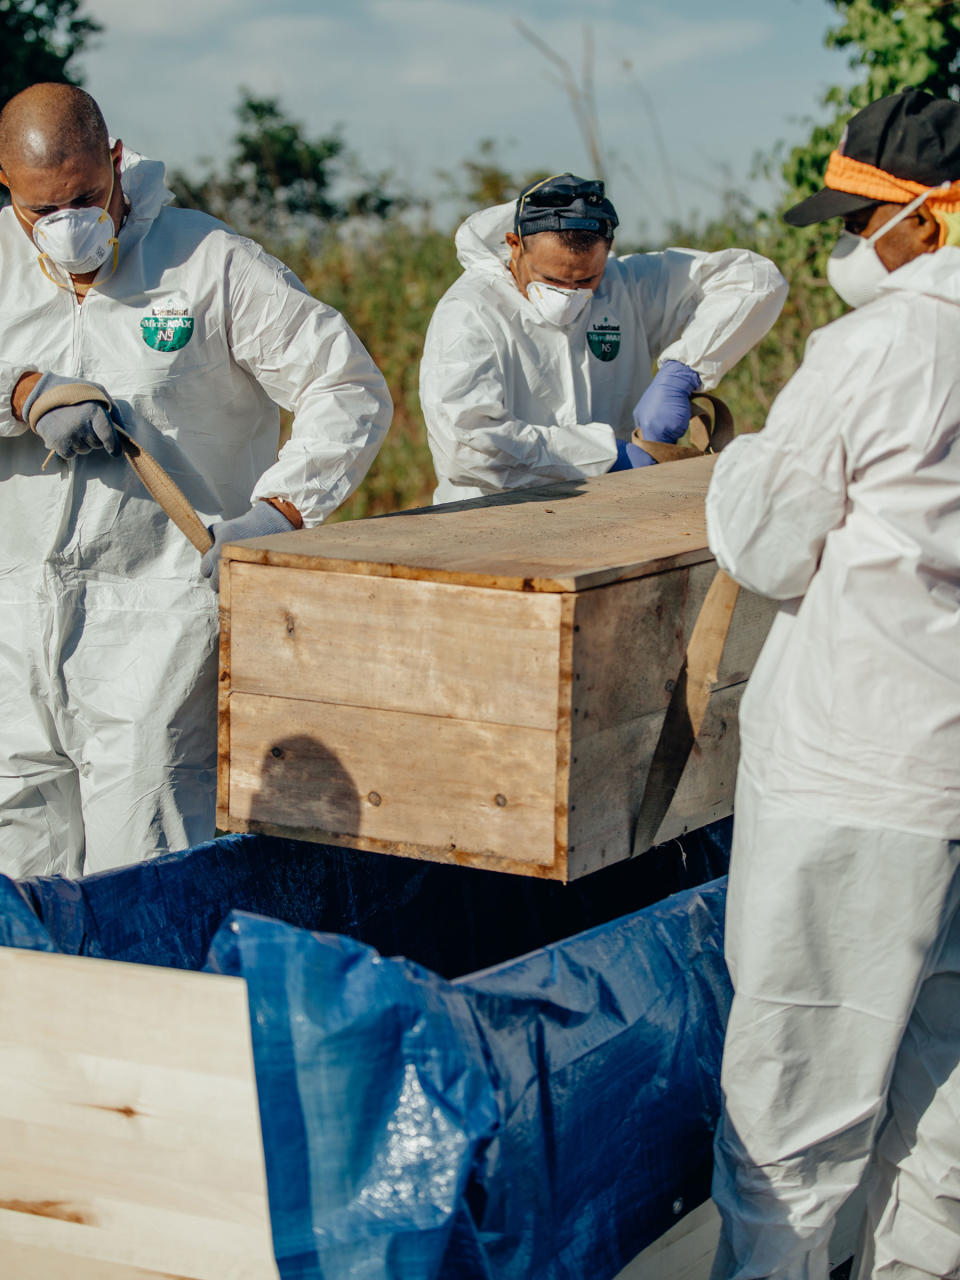 Workers place Ellen Torron’s exhumed casket into an oversized one for a cross-city trip to Mount Richmond cemetery in Staten Island.<span class="copyright">Sasha Arutyunova for TIME</span>